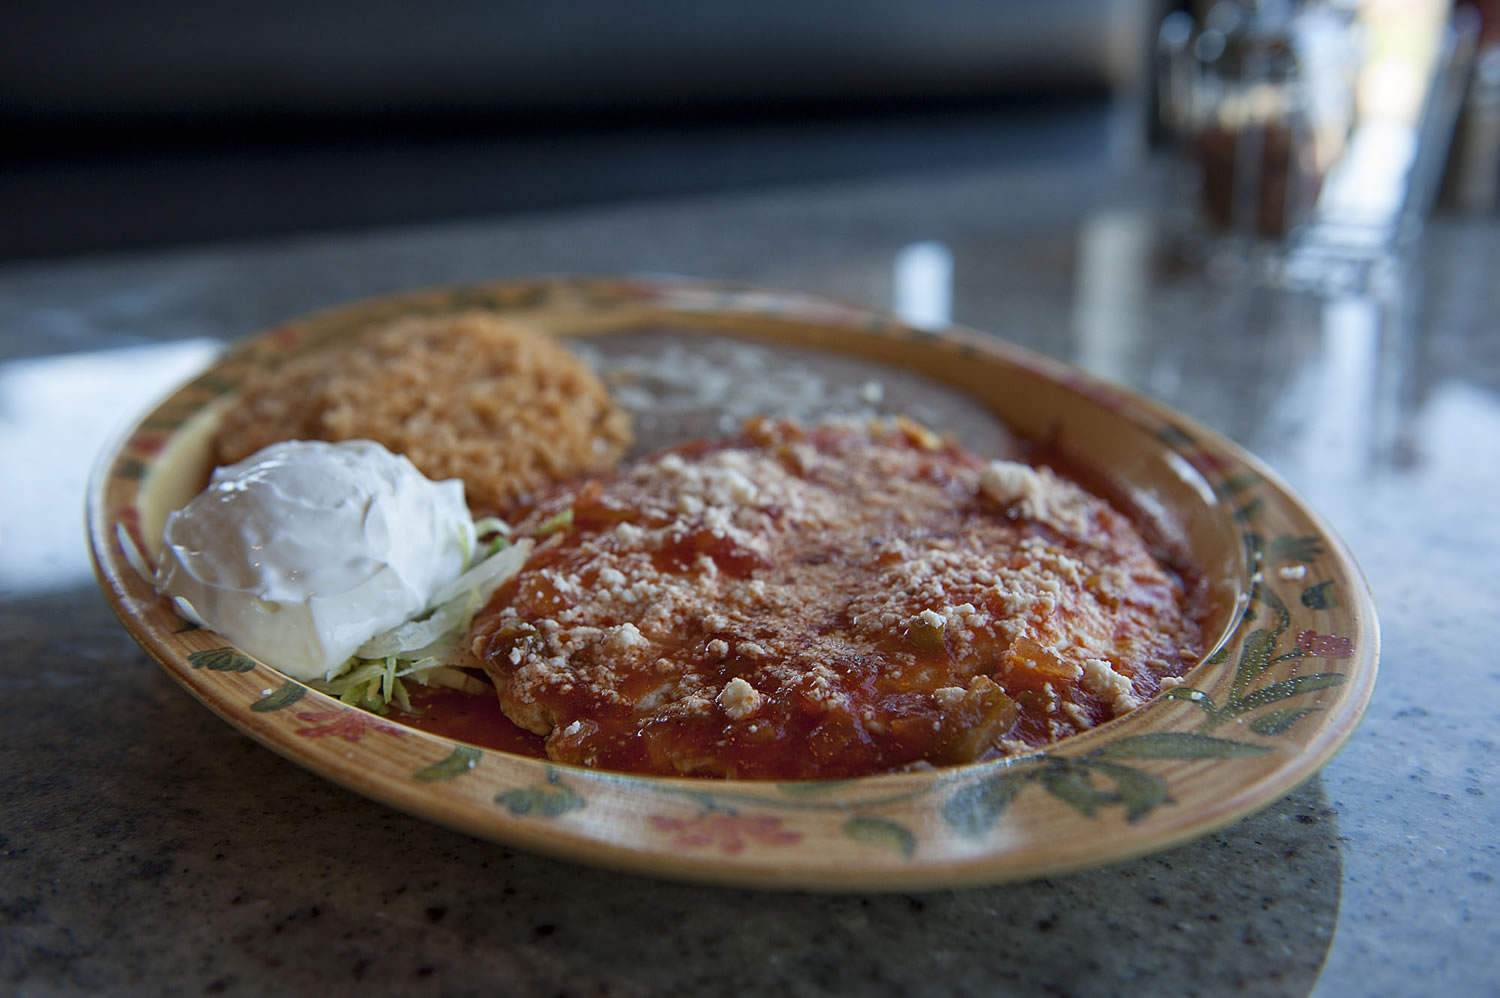 A plate of huevos rancheros is paired with rice and beans at Taqueria El Antojo in Vancouver on Sept. 28. The restaurant recently opened on East Fourth Plain Boulevard.